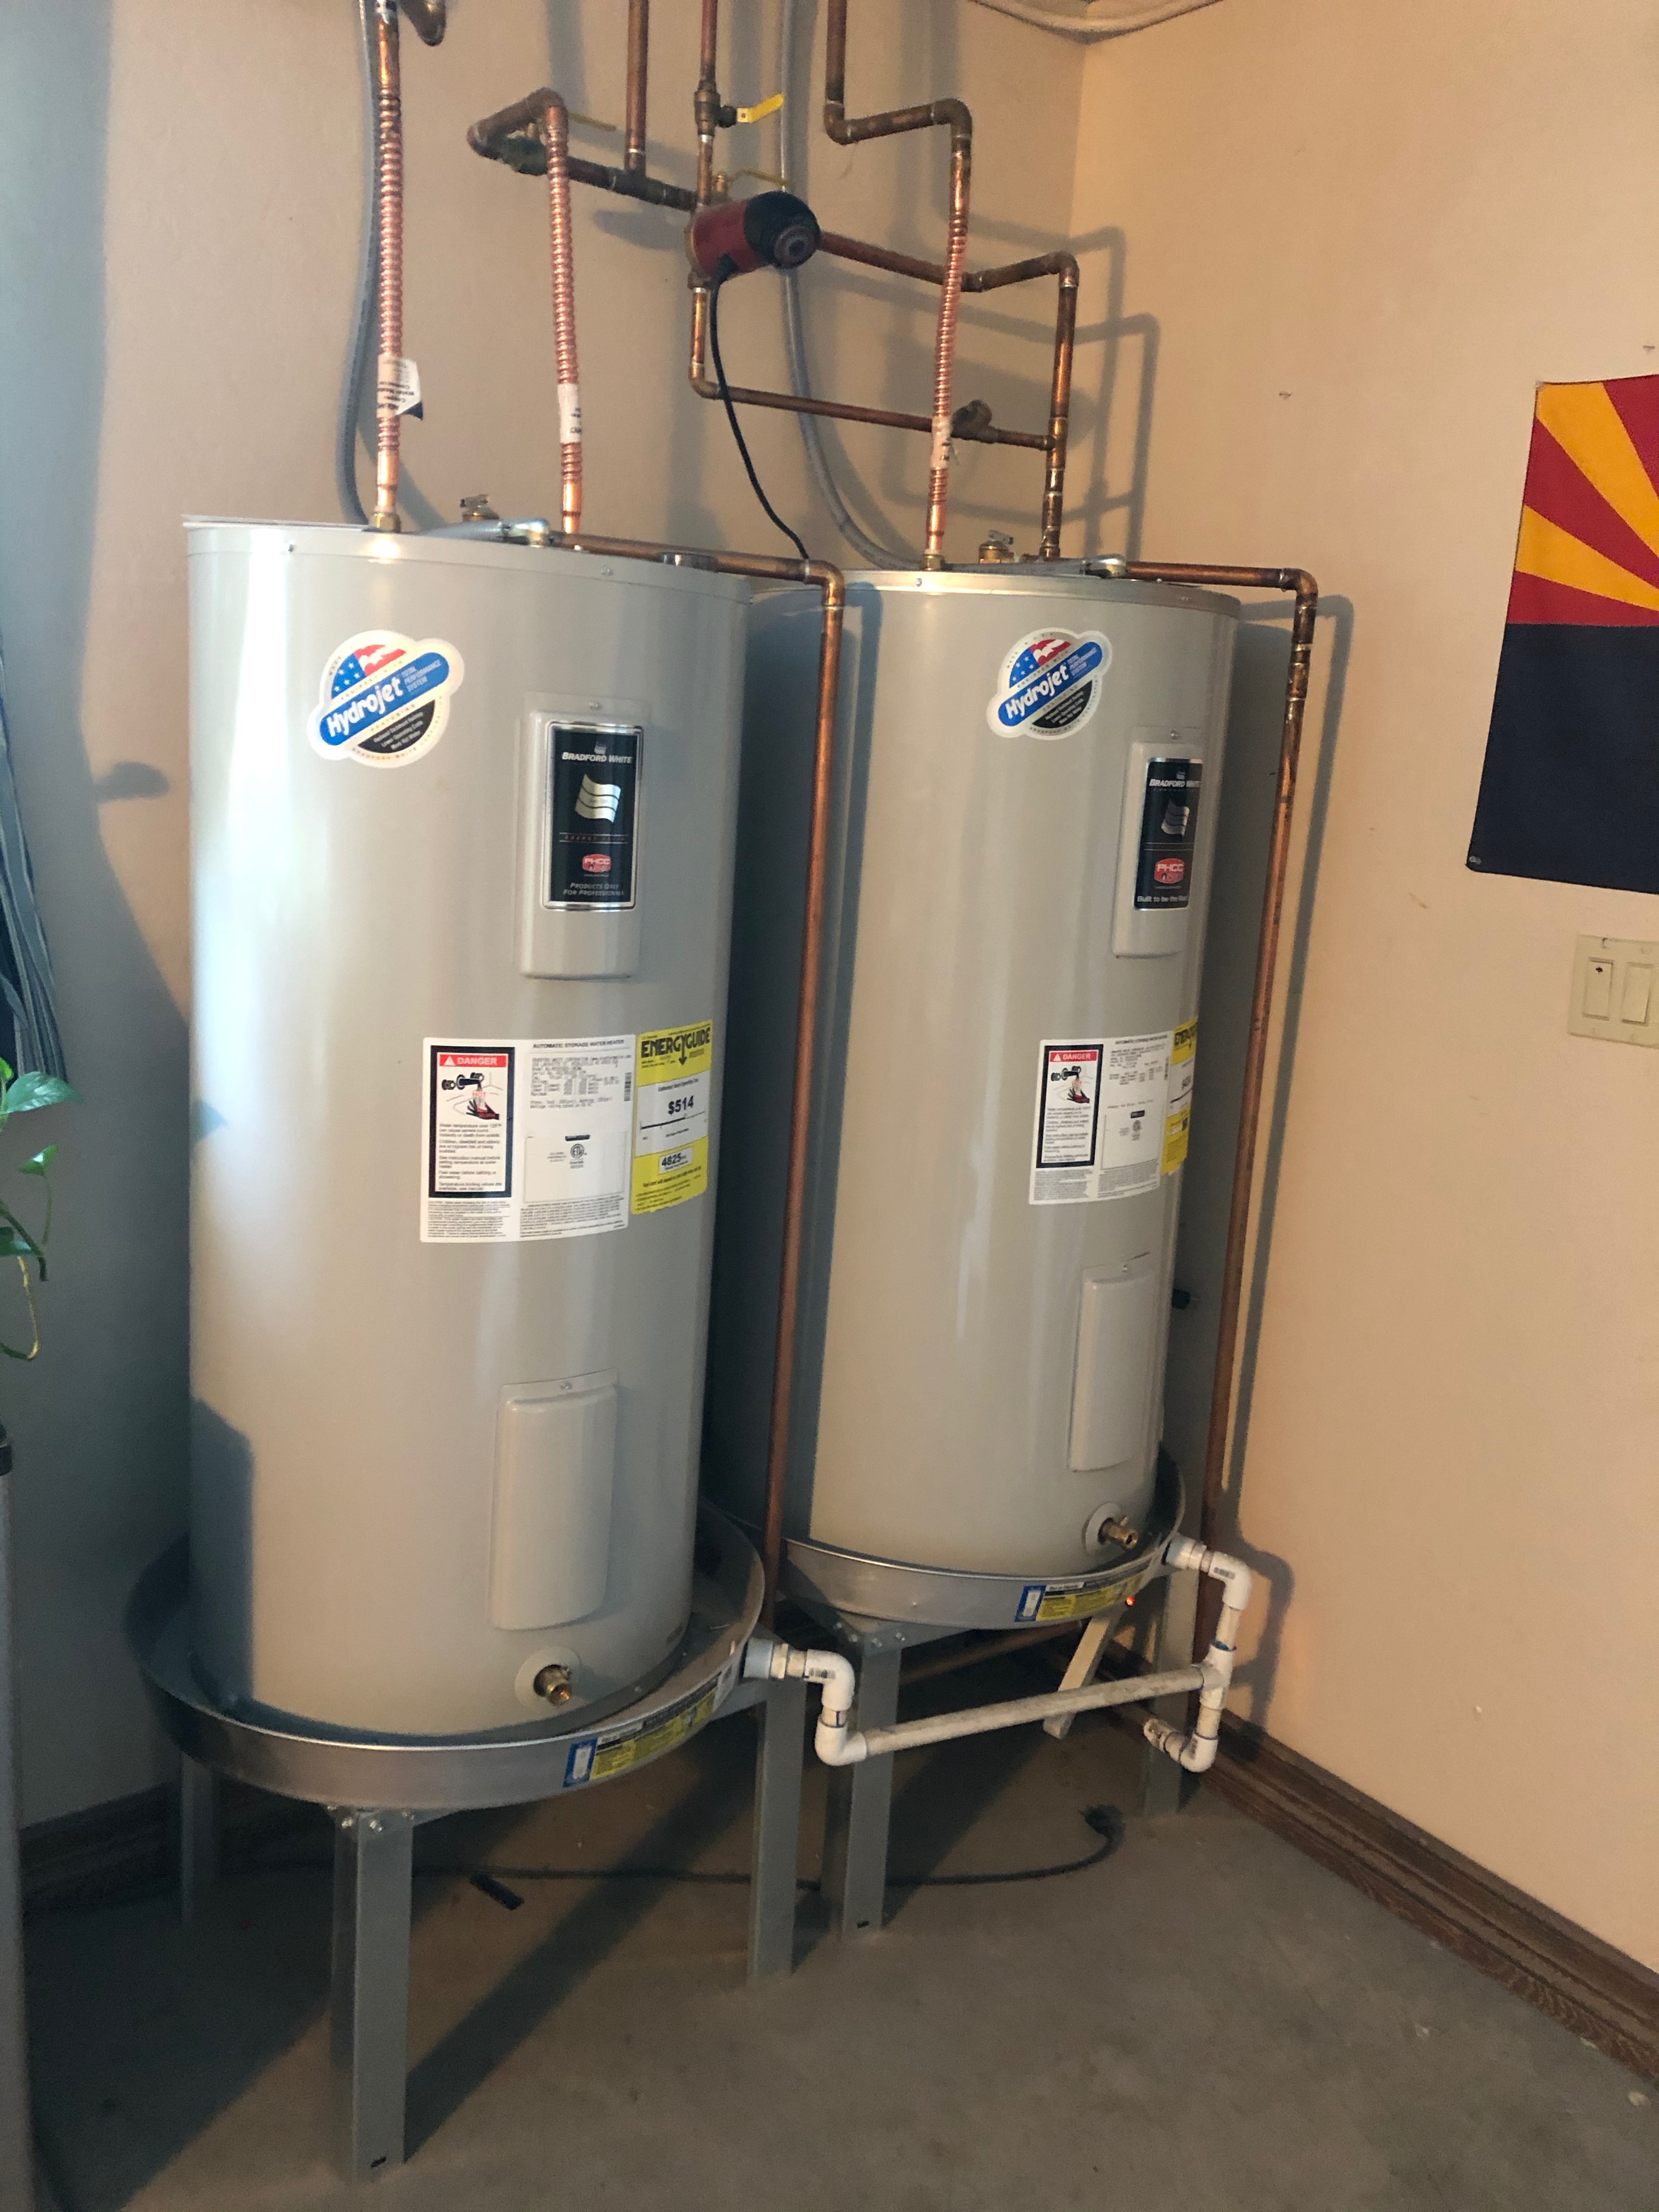 The water heaters in the Mancave